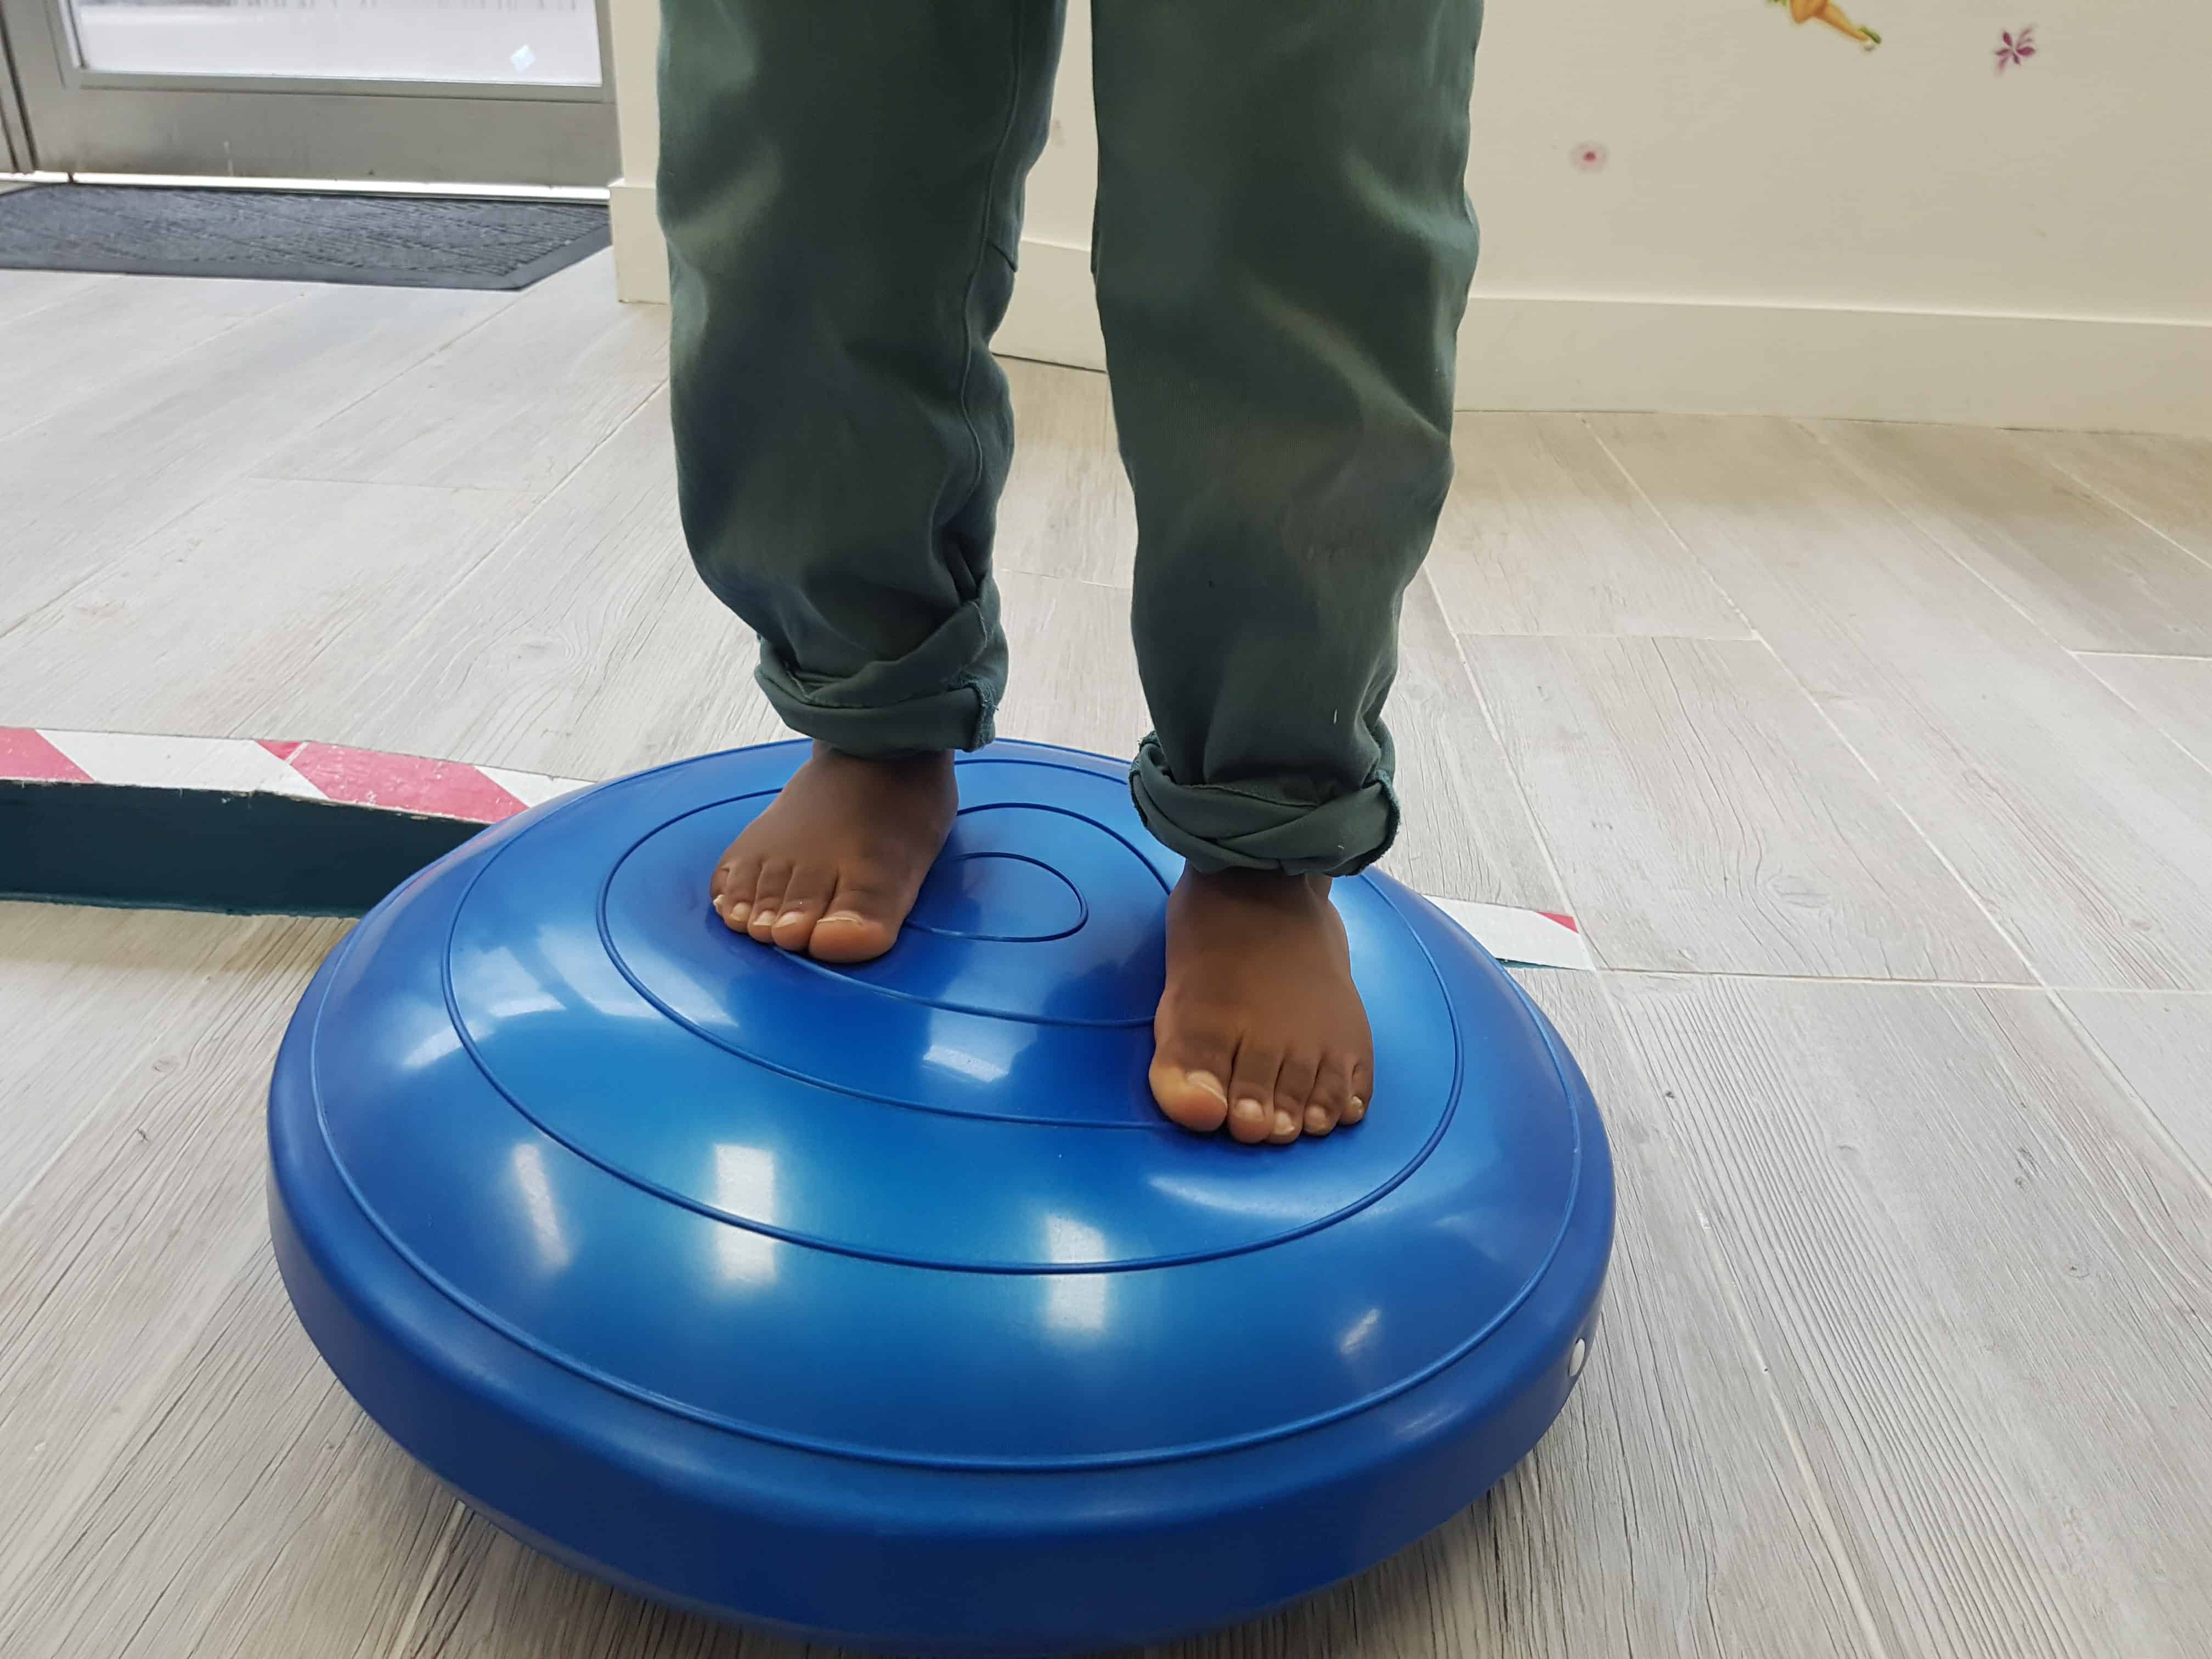 A person stepping on a wobble board, trying to balance